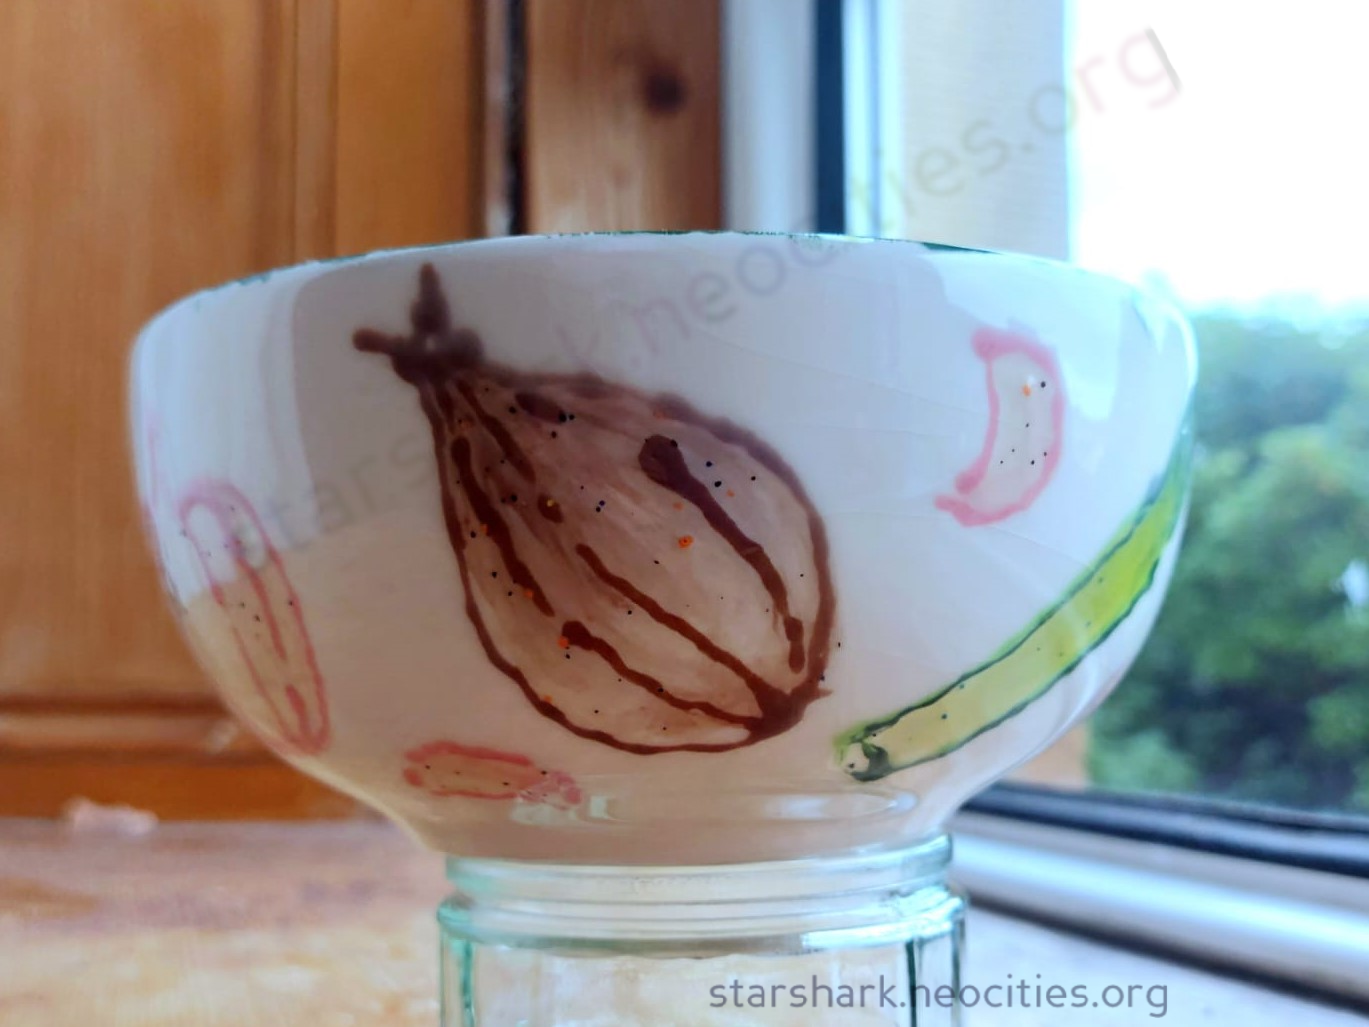 a ceramic cereal bowl painted with varius alliums: a shallot, leek, and garlic gloves are viible.